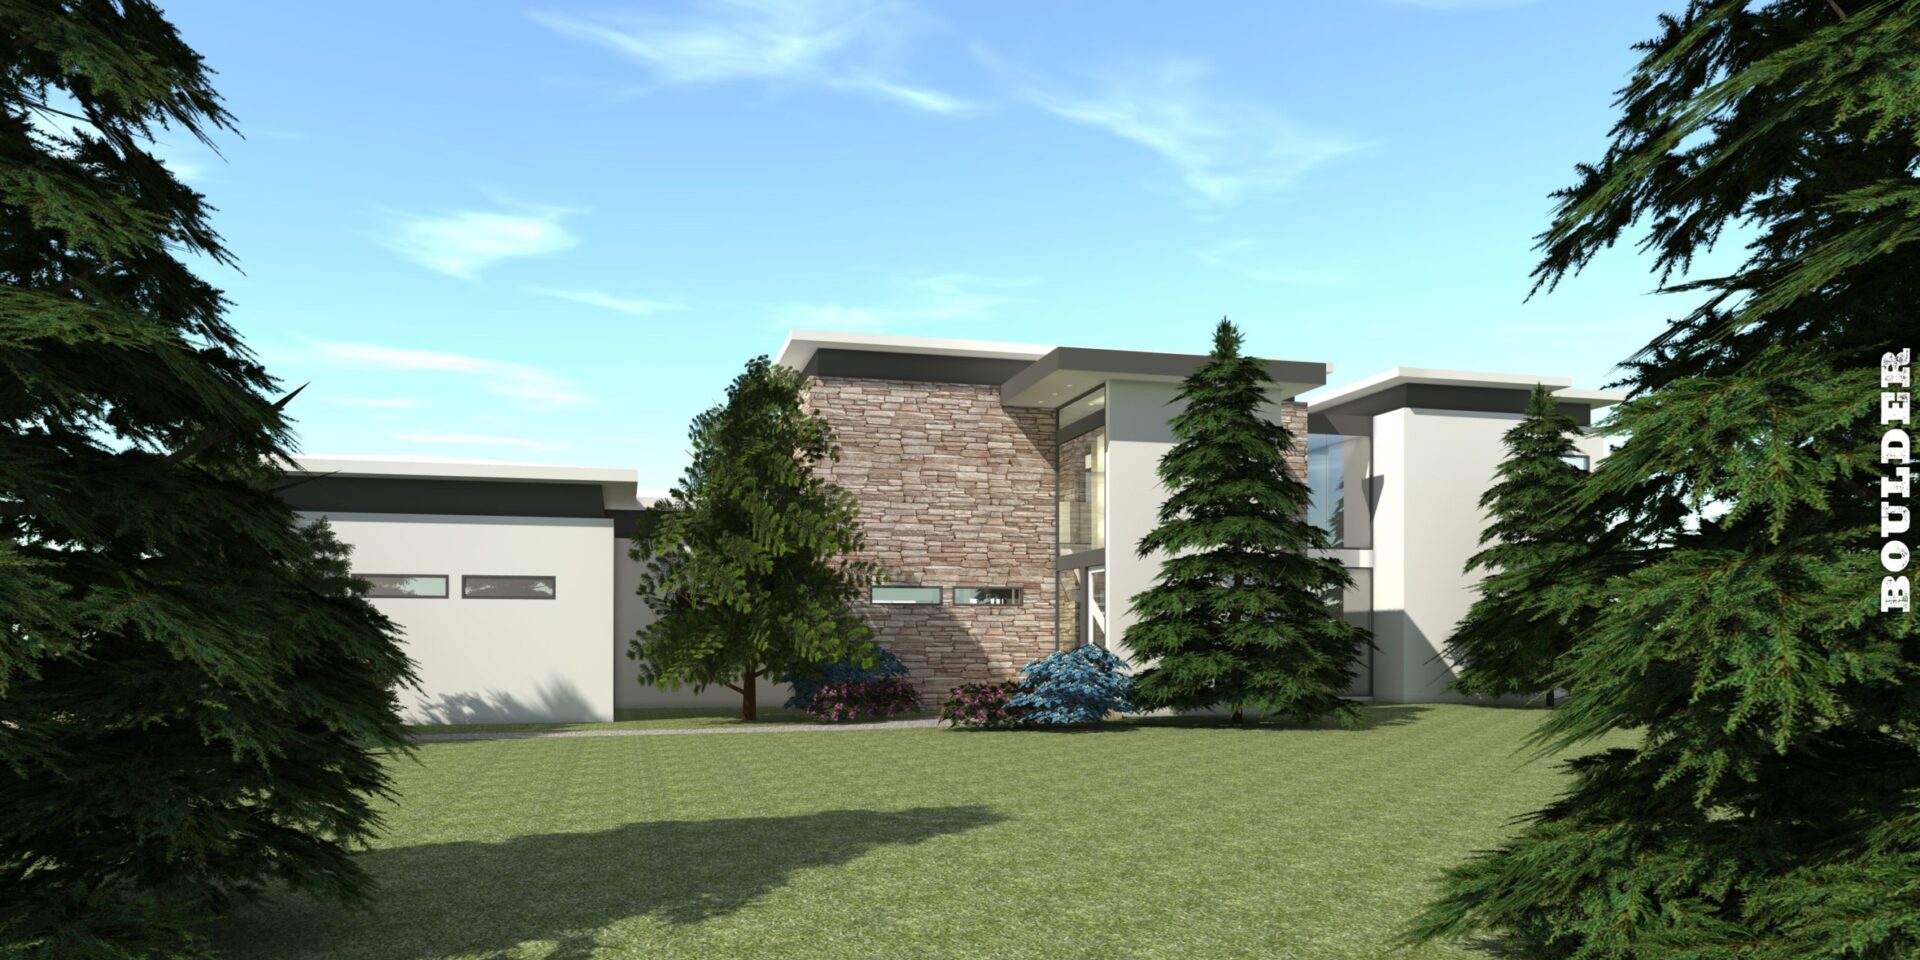 4 Bedroom Modern Home with Pool Cabana. Boulder by Tyree House Plans.